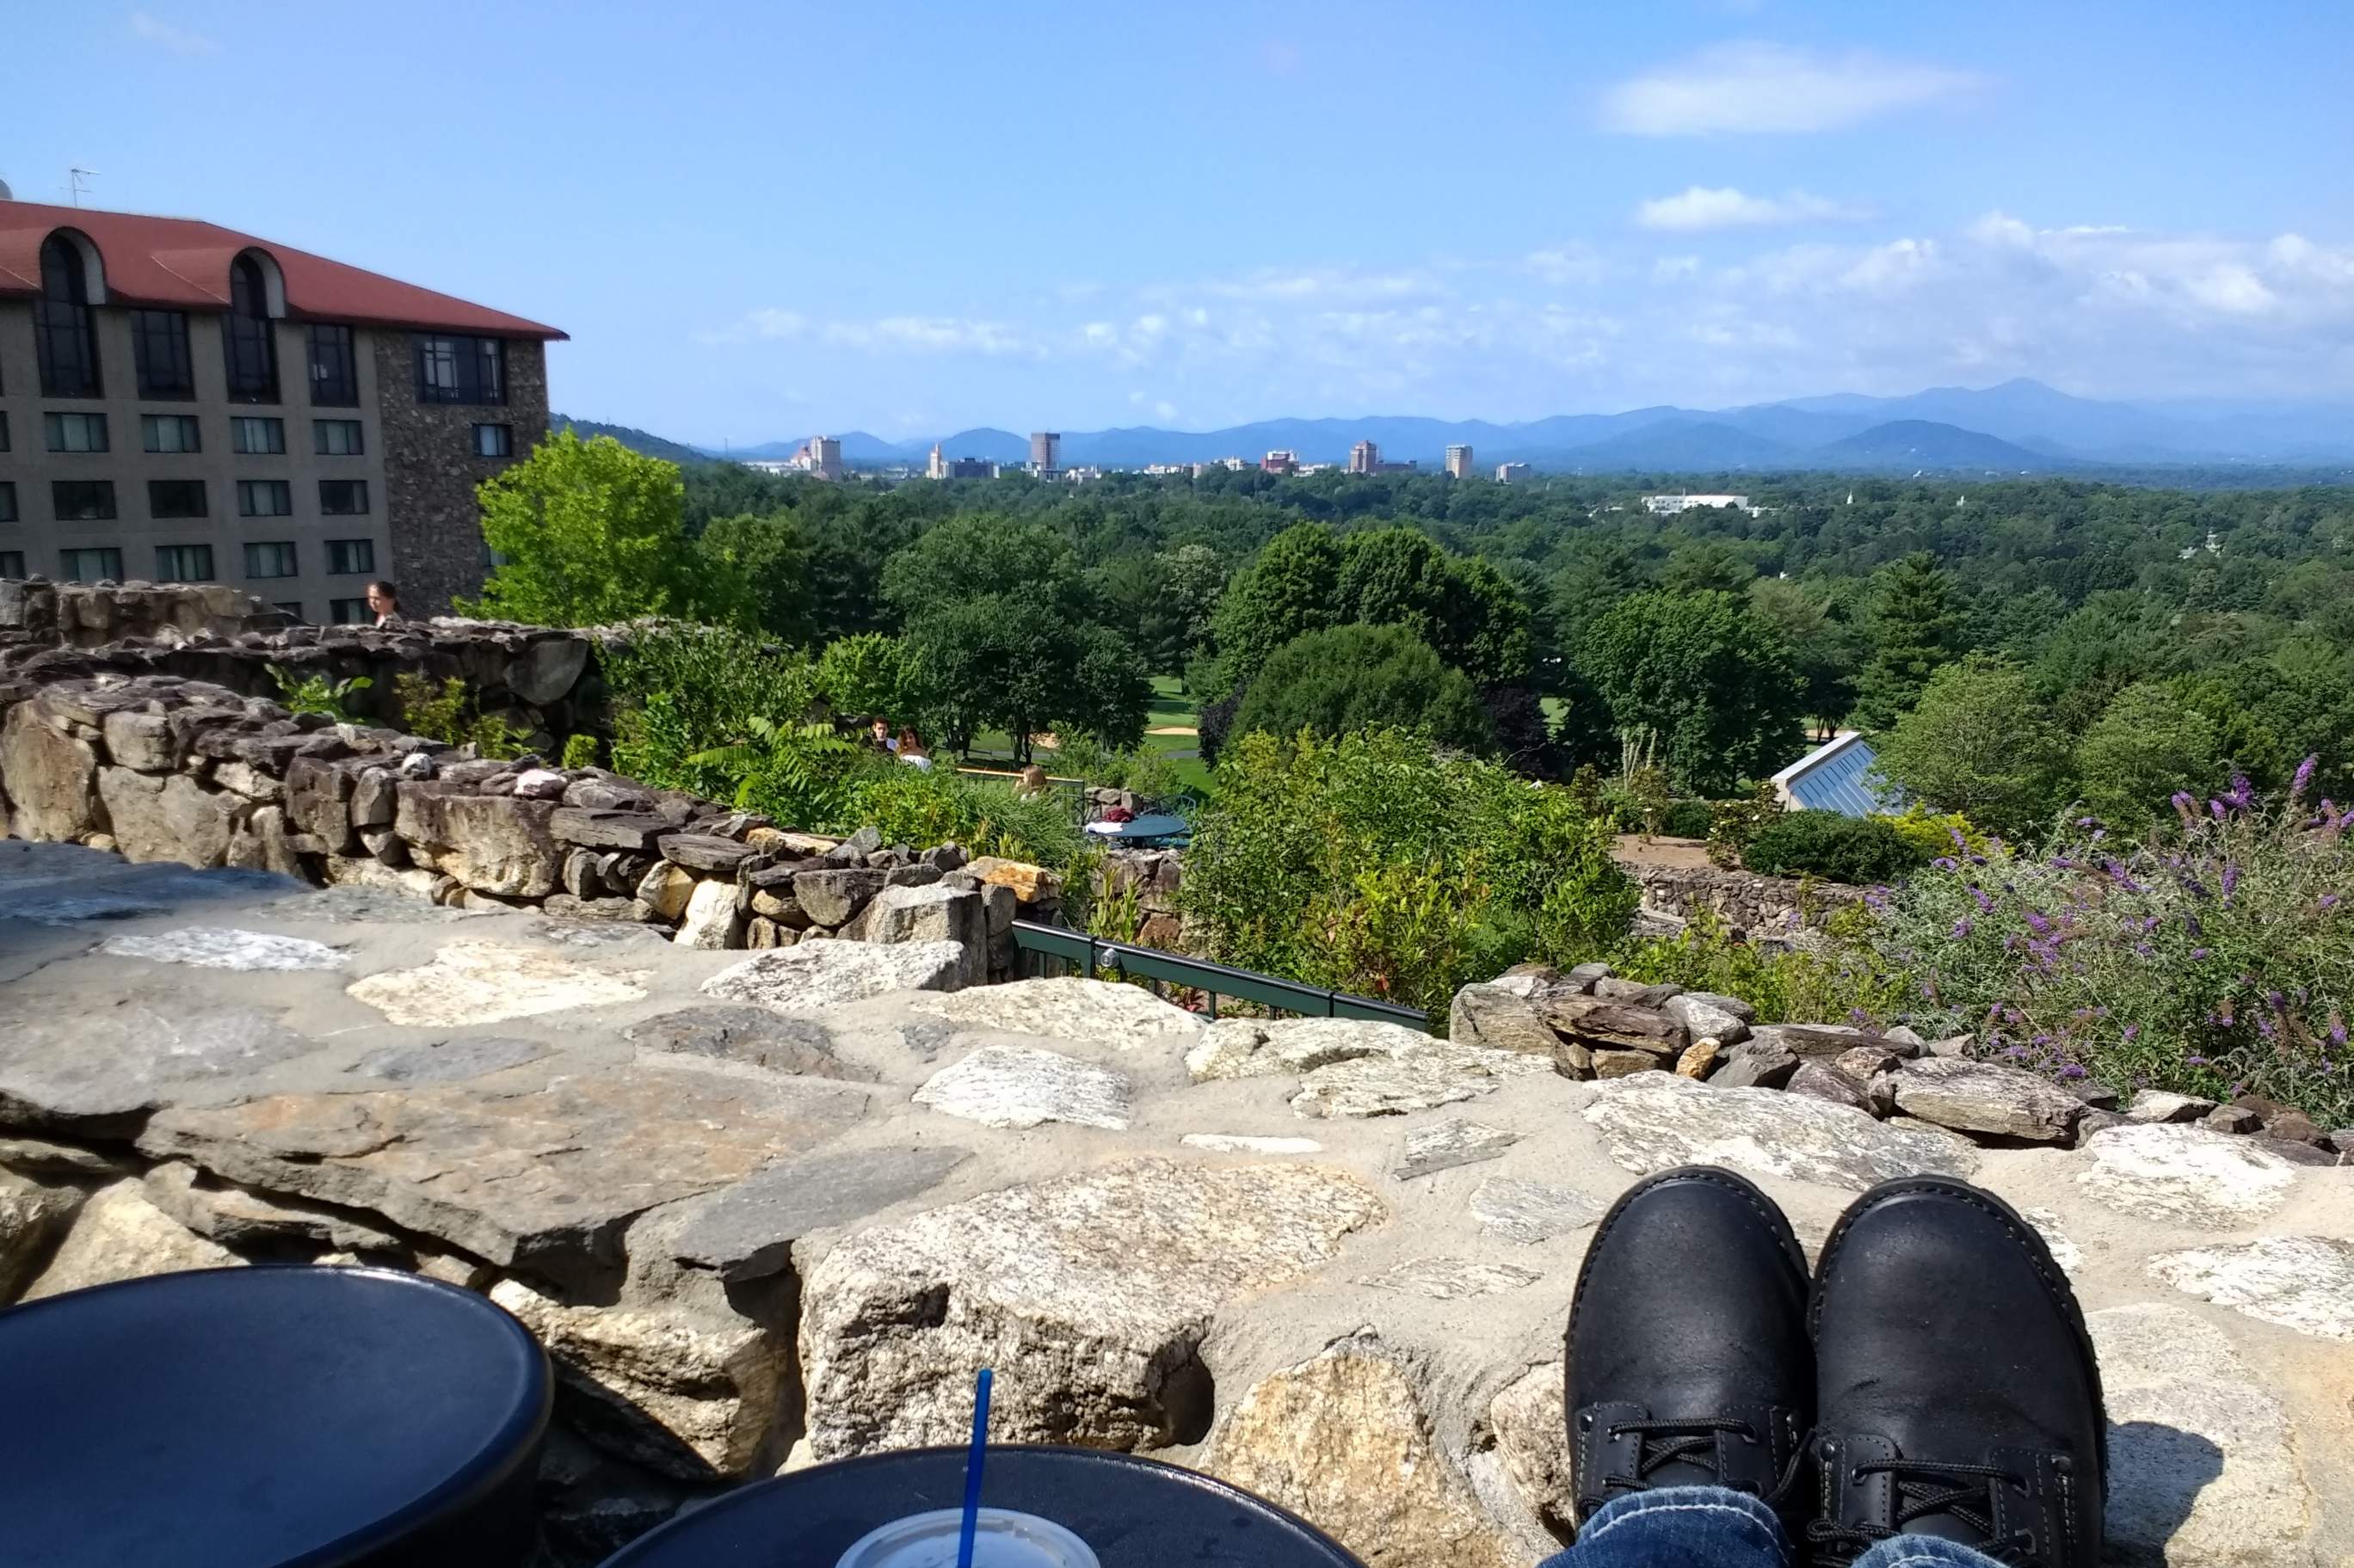 The view of Asheville from the Grove Park Inn.